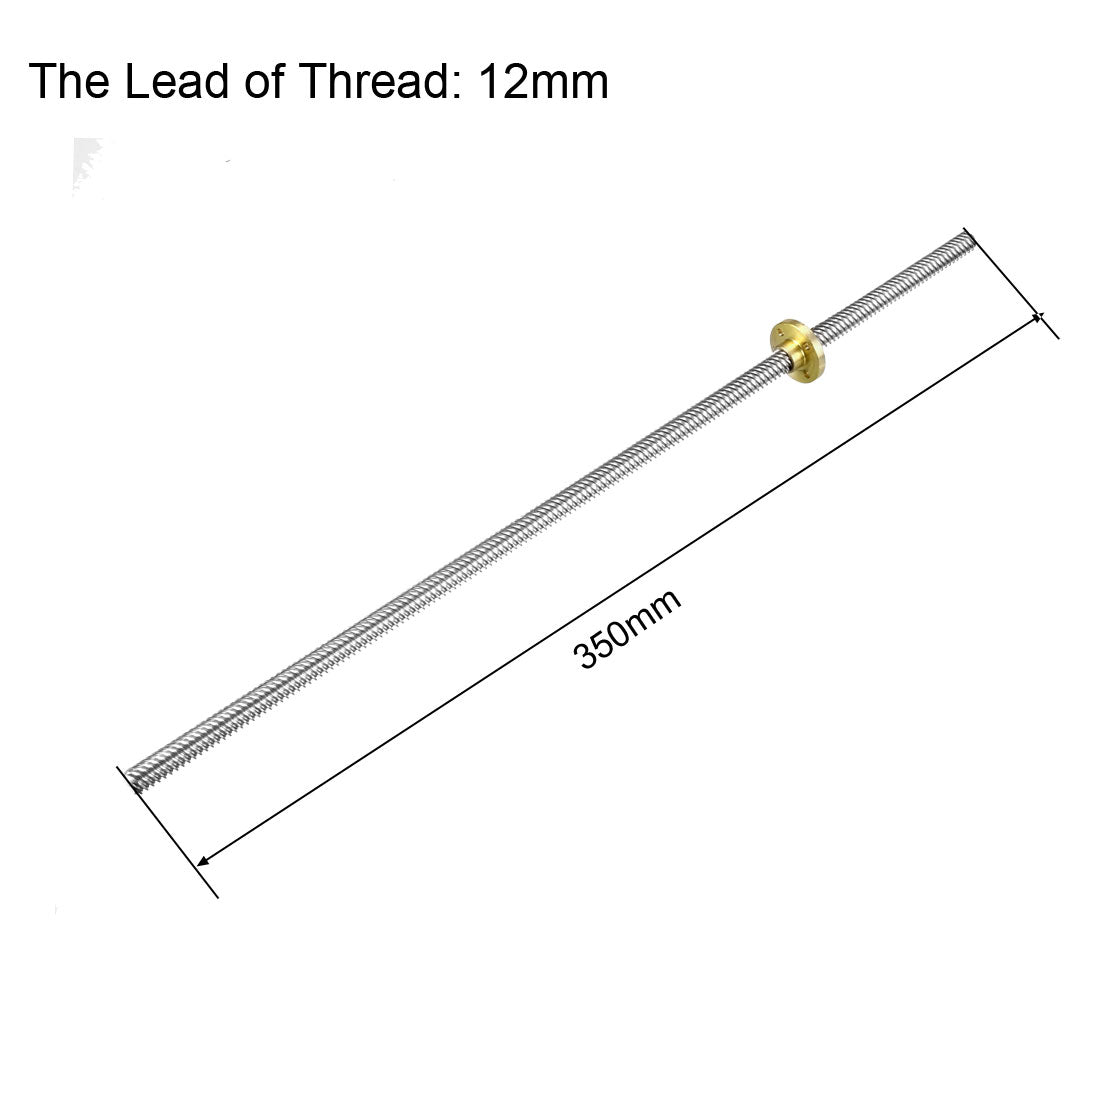 uxcell Uxcell 350mm T8 Pitch 2mm Lead 12mm Lead Screw Rod with Copper Nut for 3D Printer